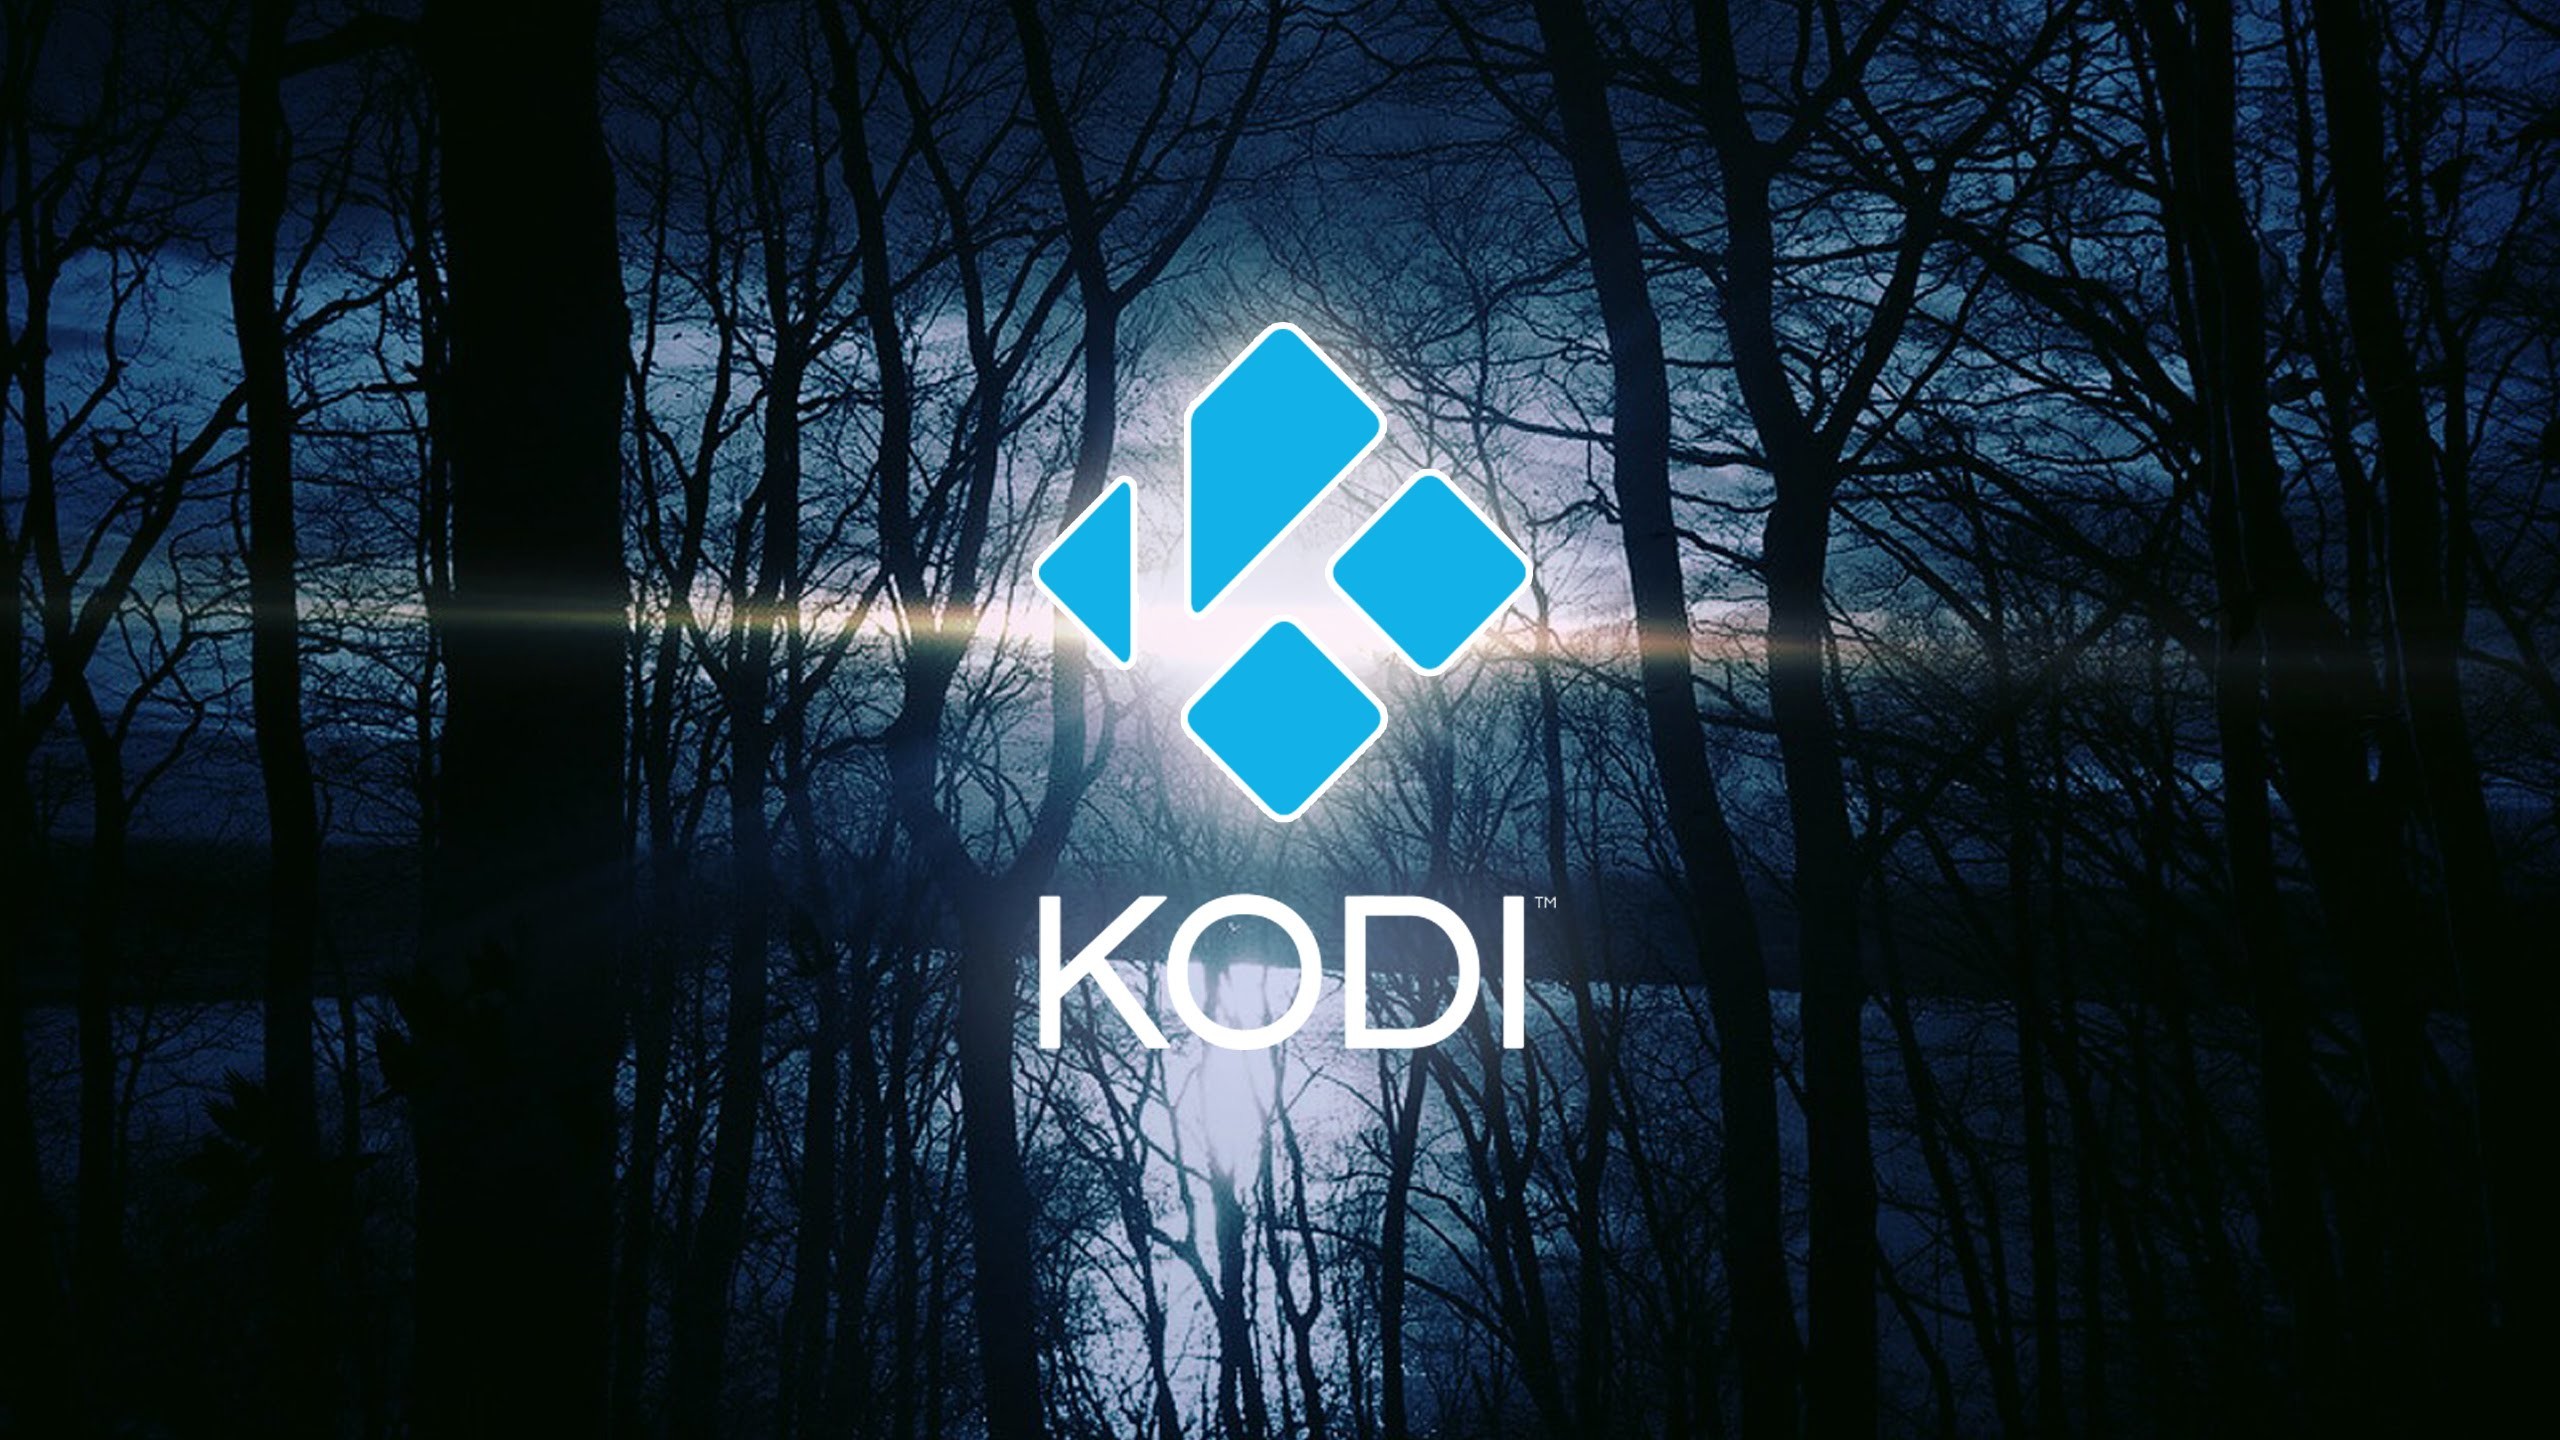 2560x1440 How to Install Kodi 15.2 On any device - Android/Firestick/Pc